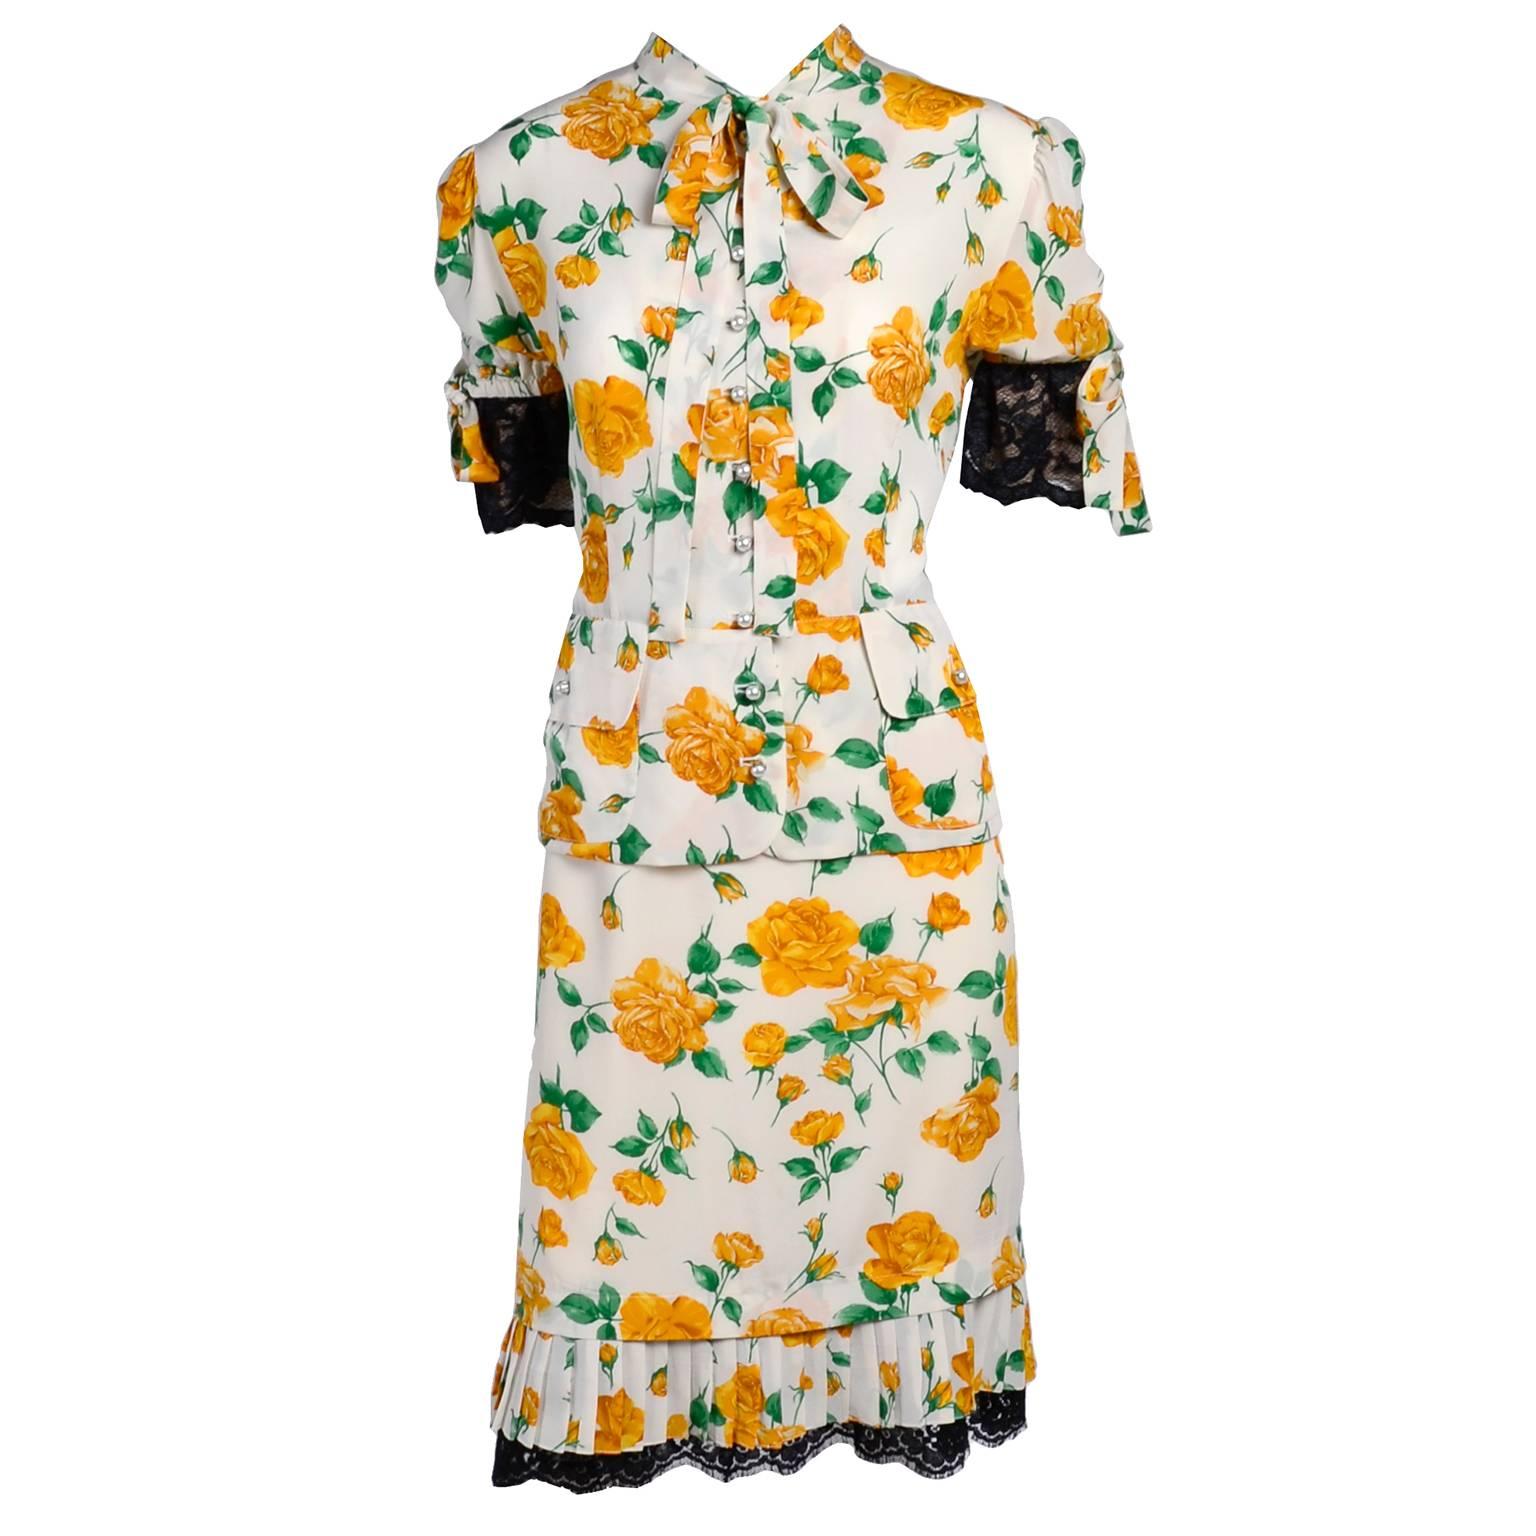 This two piece silk vintage 1990s Dolce & Gabbana dress has a skirt and blouse in a yellow rose print fabric with black lace trim.  The blouse has a slight peplum, a pussy bow, faux pearl buttons up the front, two front pockets and puff sleeves with